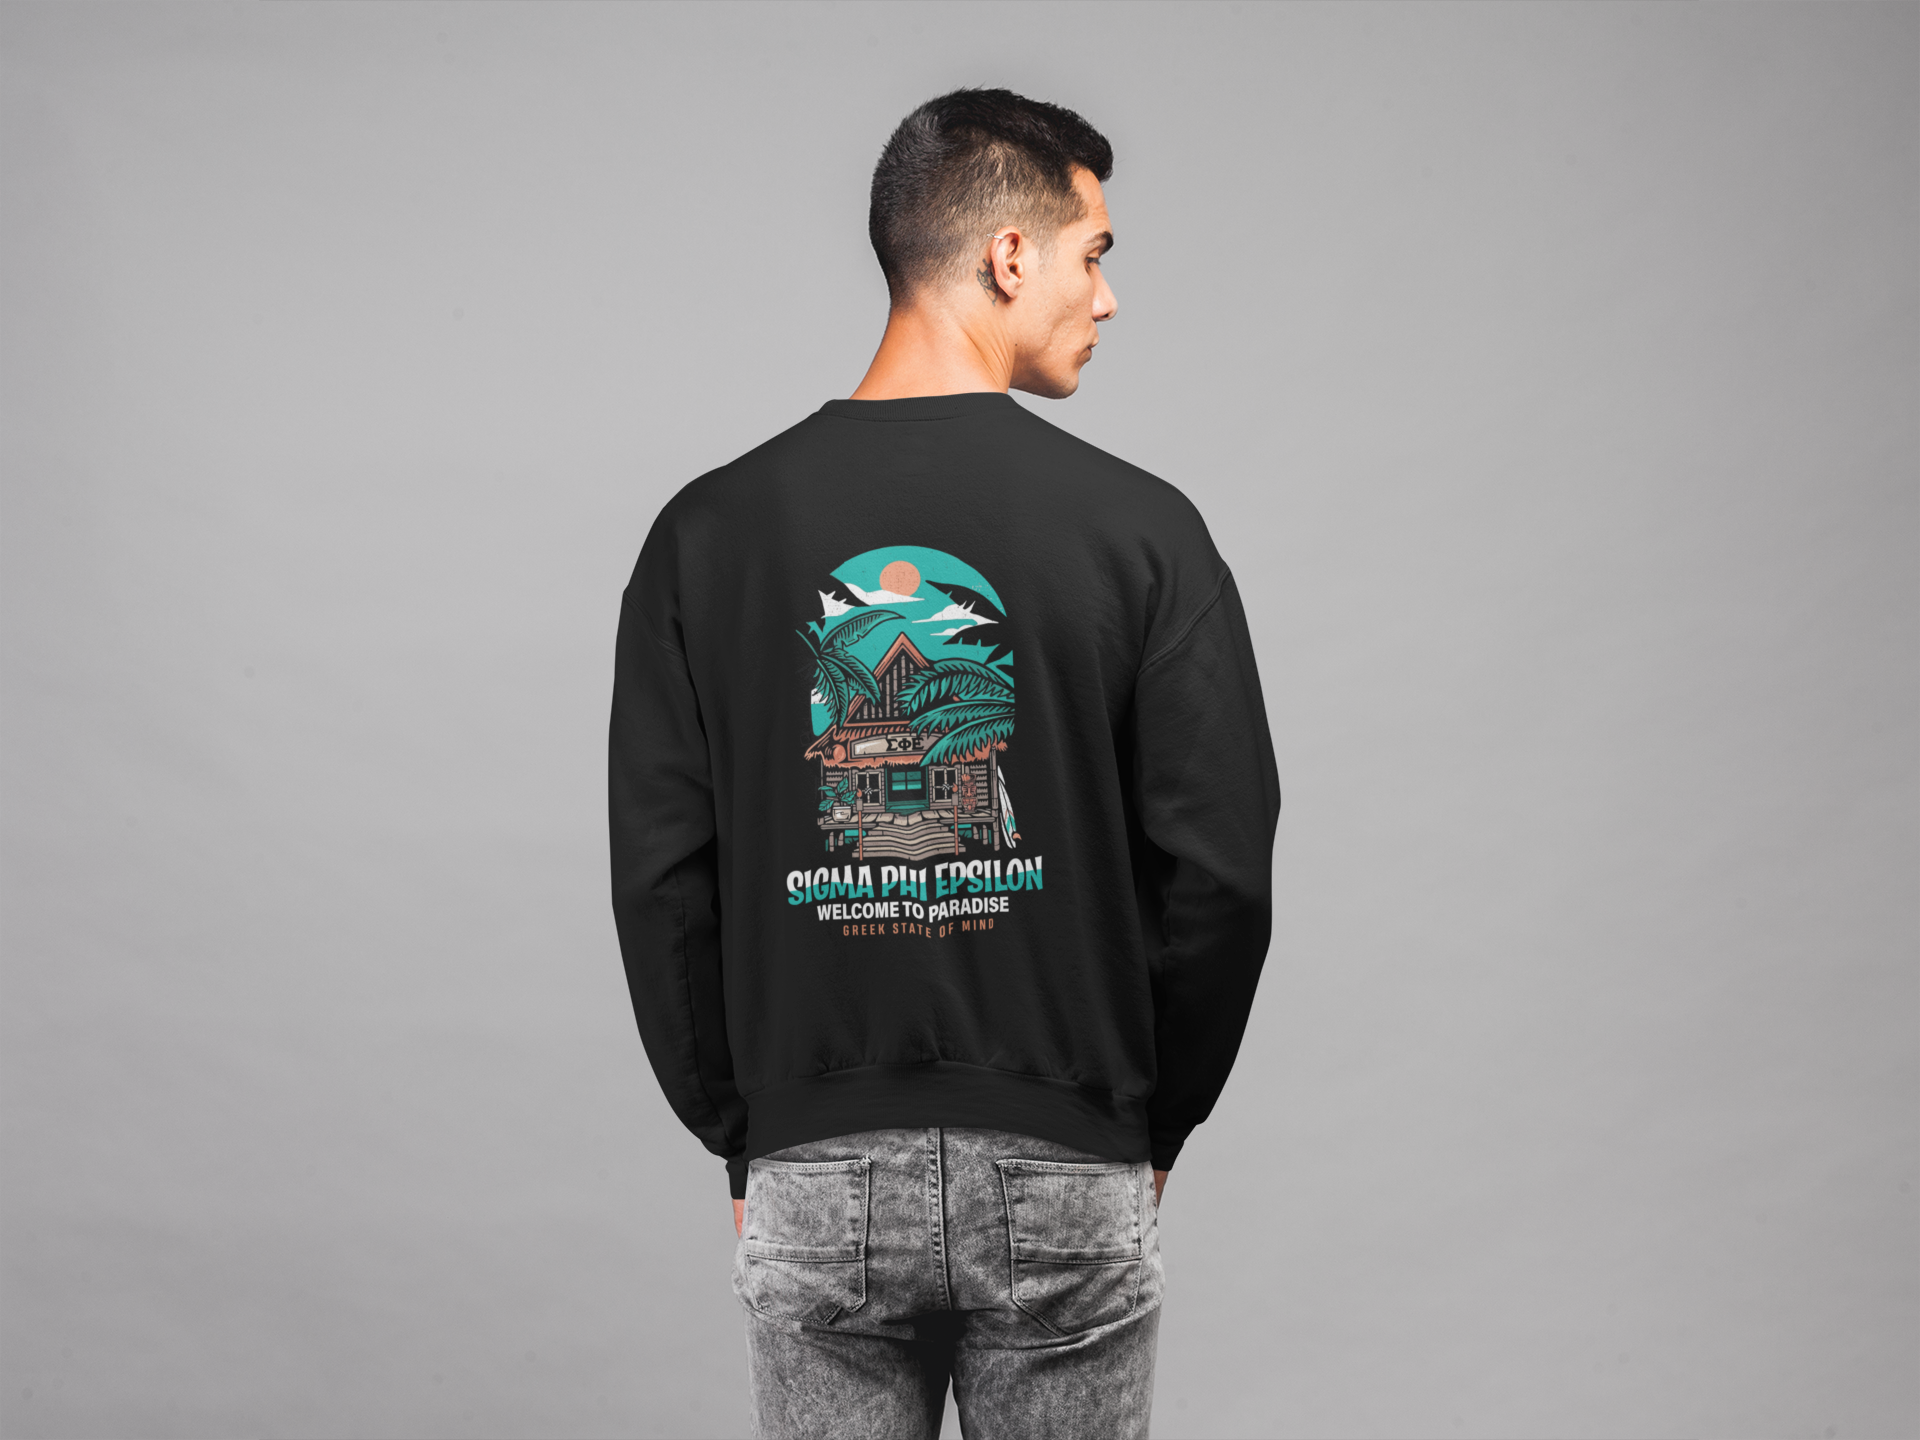 Sigma Phi Epsilon Graphic Crewneck Sweatshirt | Welcome to Paradise |  SigEp Fraternity Clothes and Merchandise model 